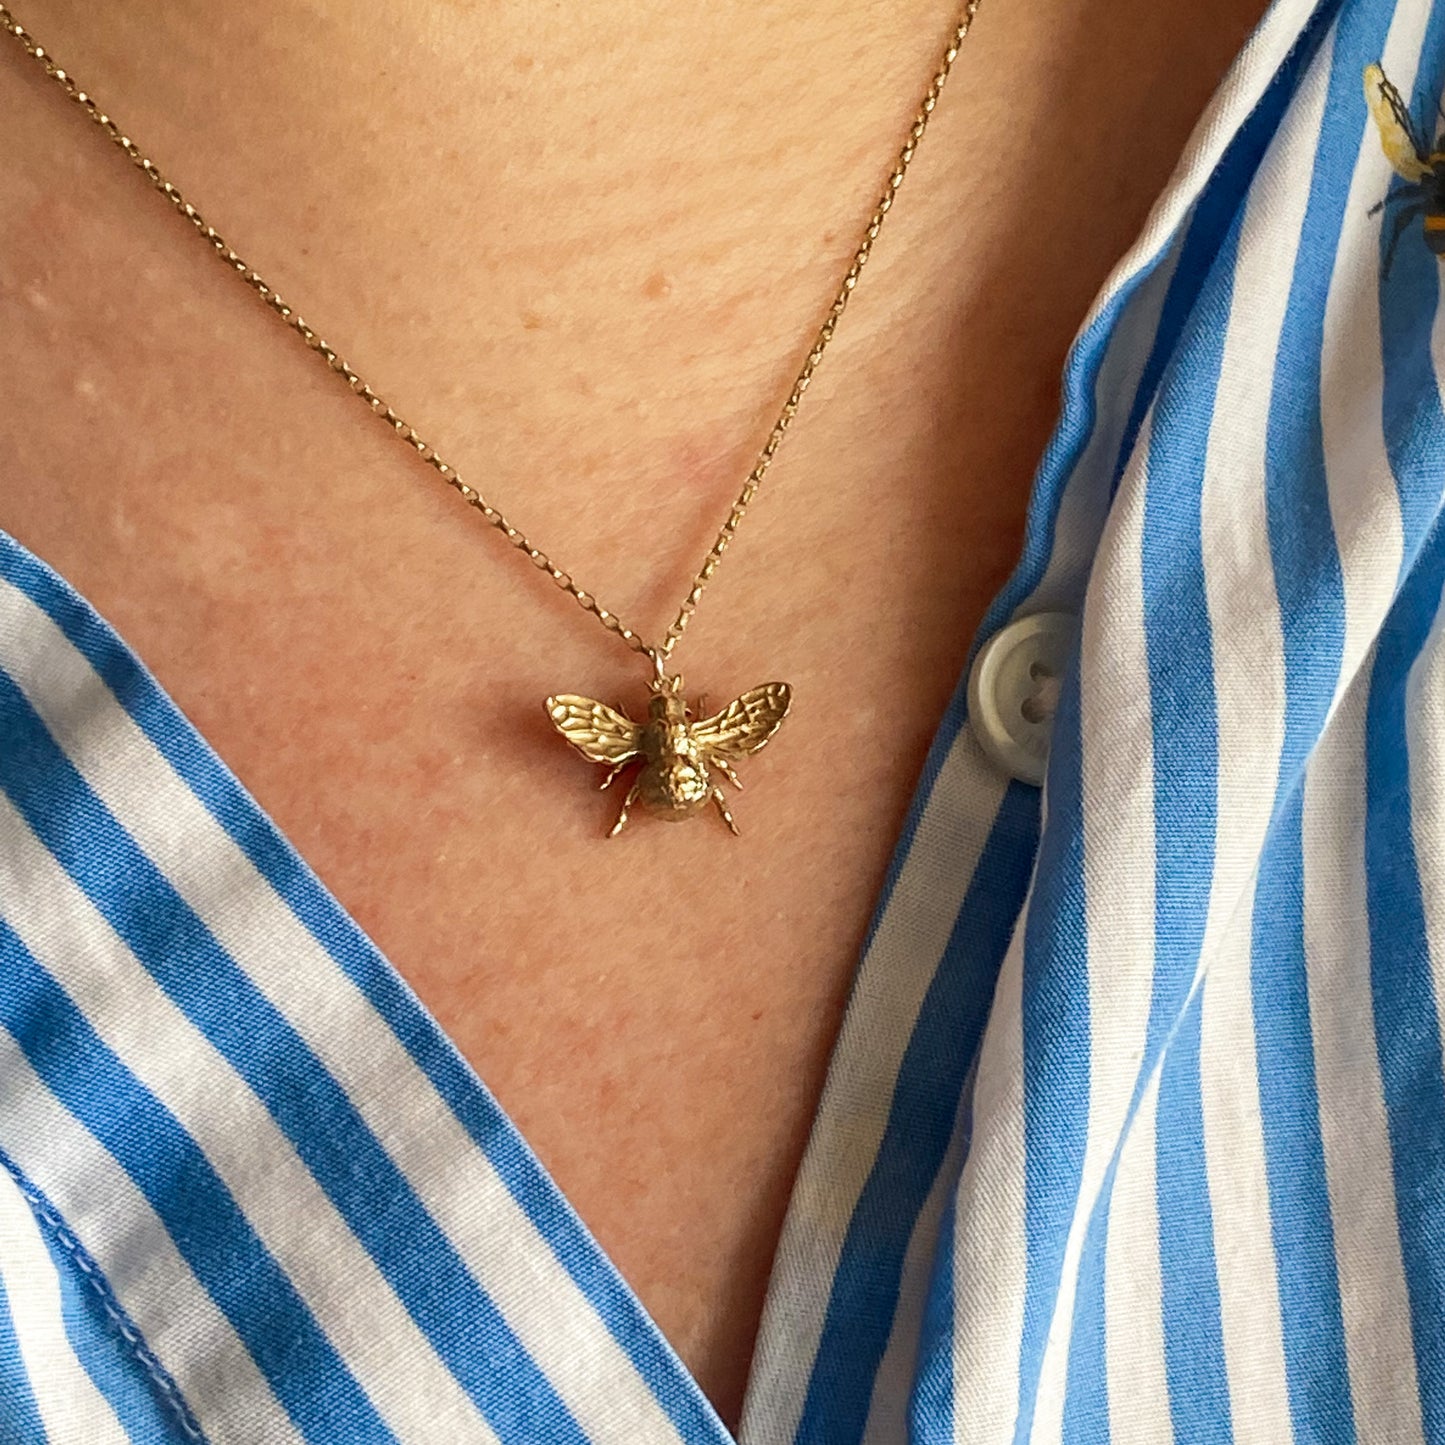 Bee Mine - Solid silver or gold babybee necklace